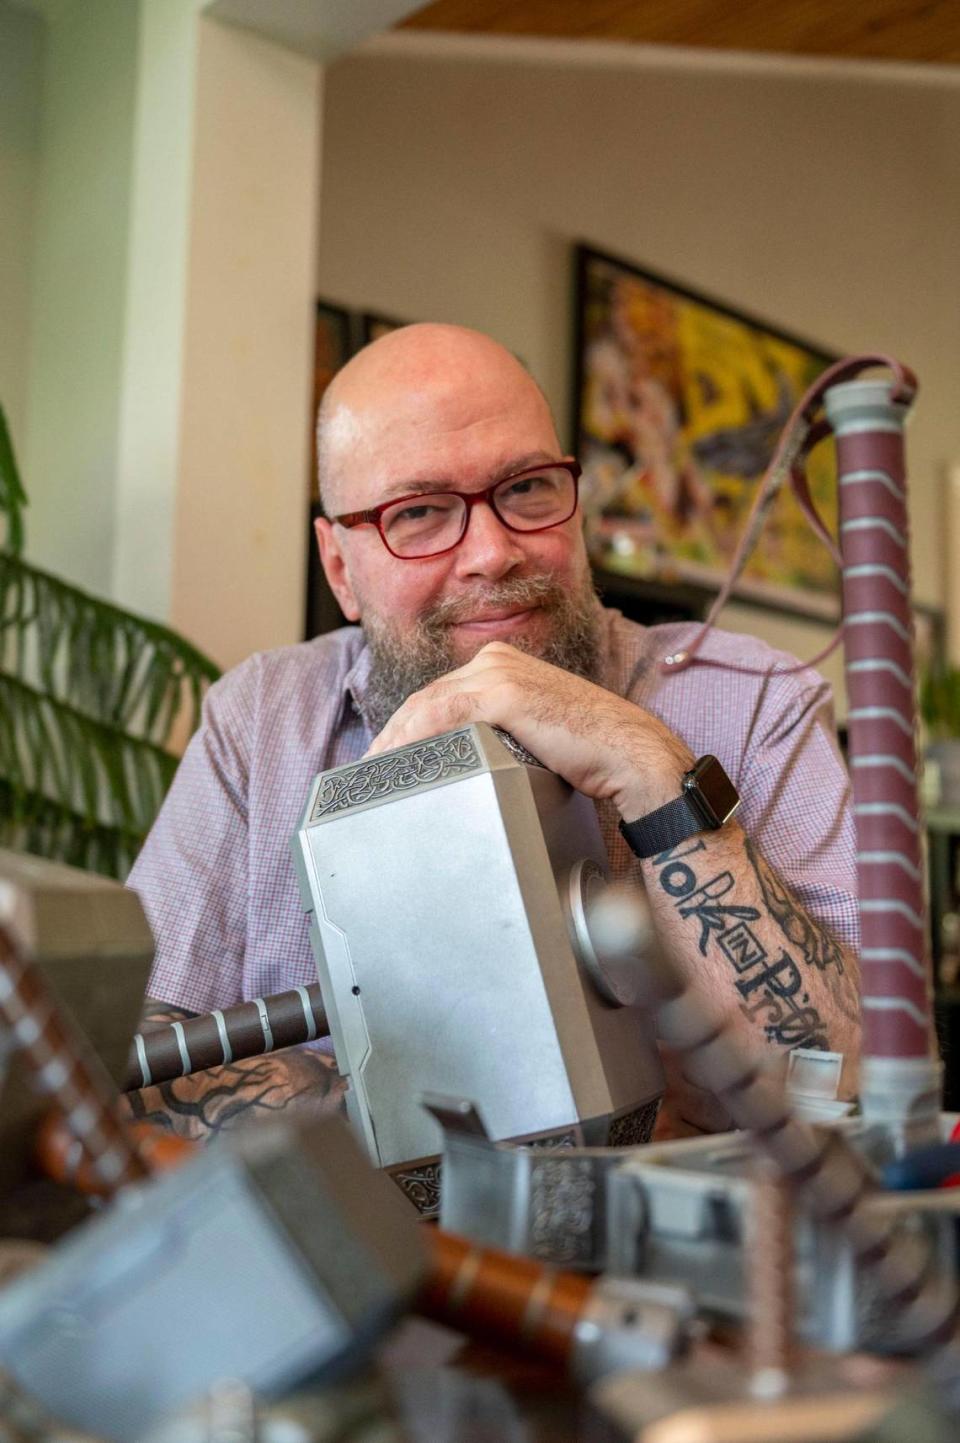 Jason Aaron showcases a variety of Thor hammers at his home in Prairie Village. He’s a key player in the Marvel Comics universe, creating the plotlines for the upcoming movie “Thor: Love and Thunder.”